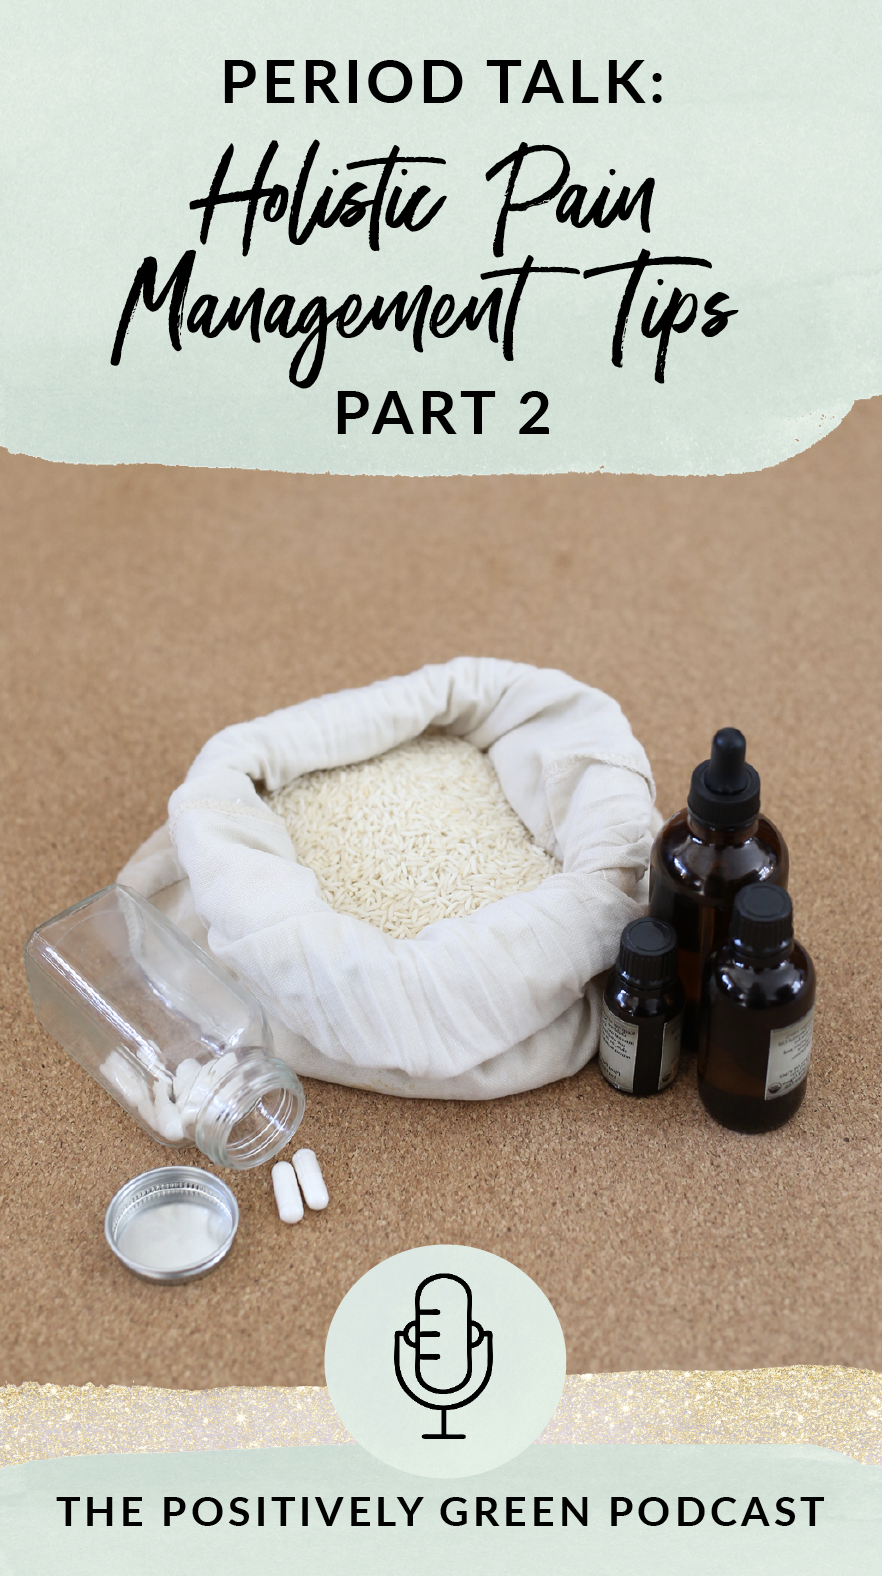 Holistic Pain Management Tips for a zero waste period Episode 17 The Positively Green Podcast